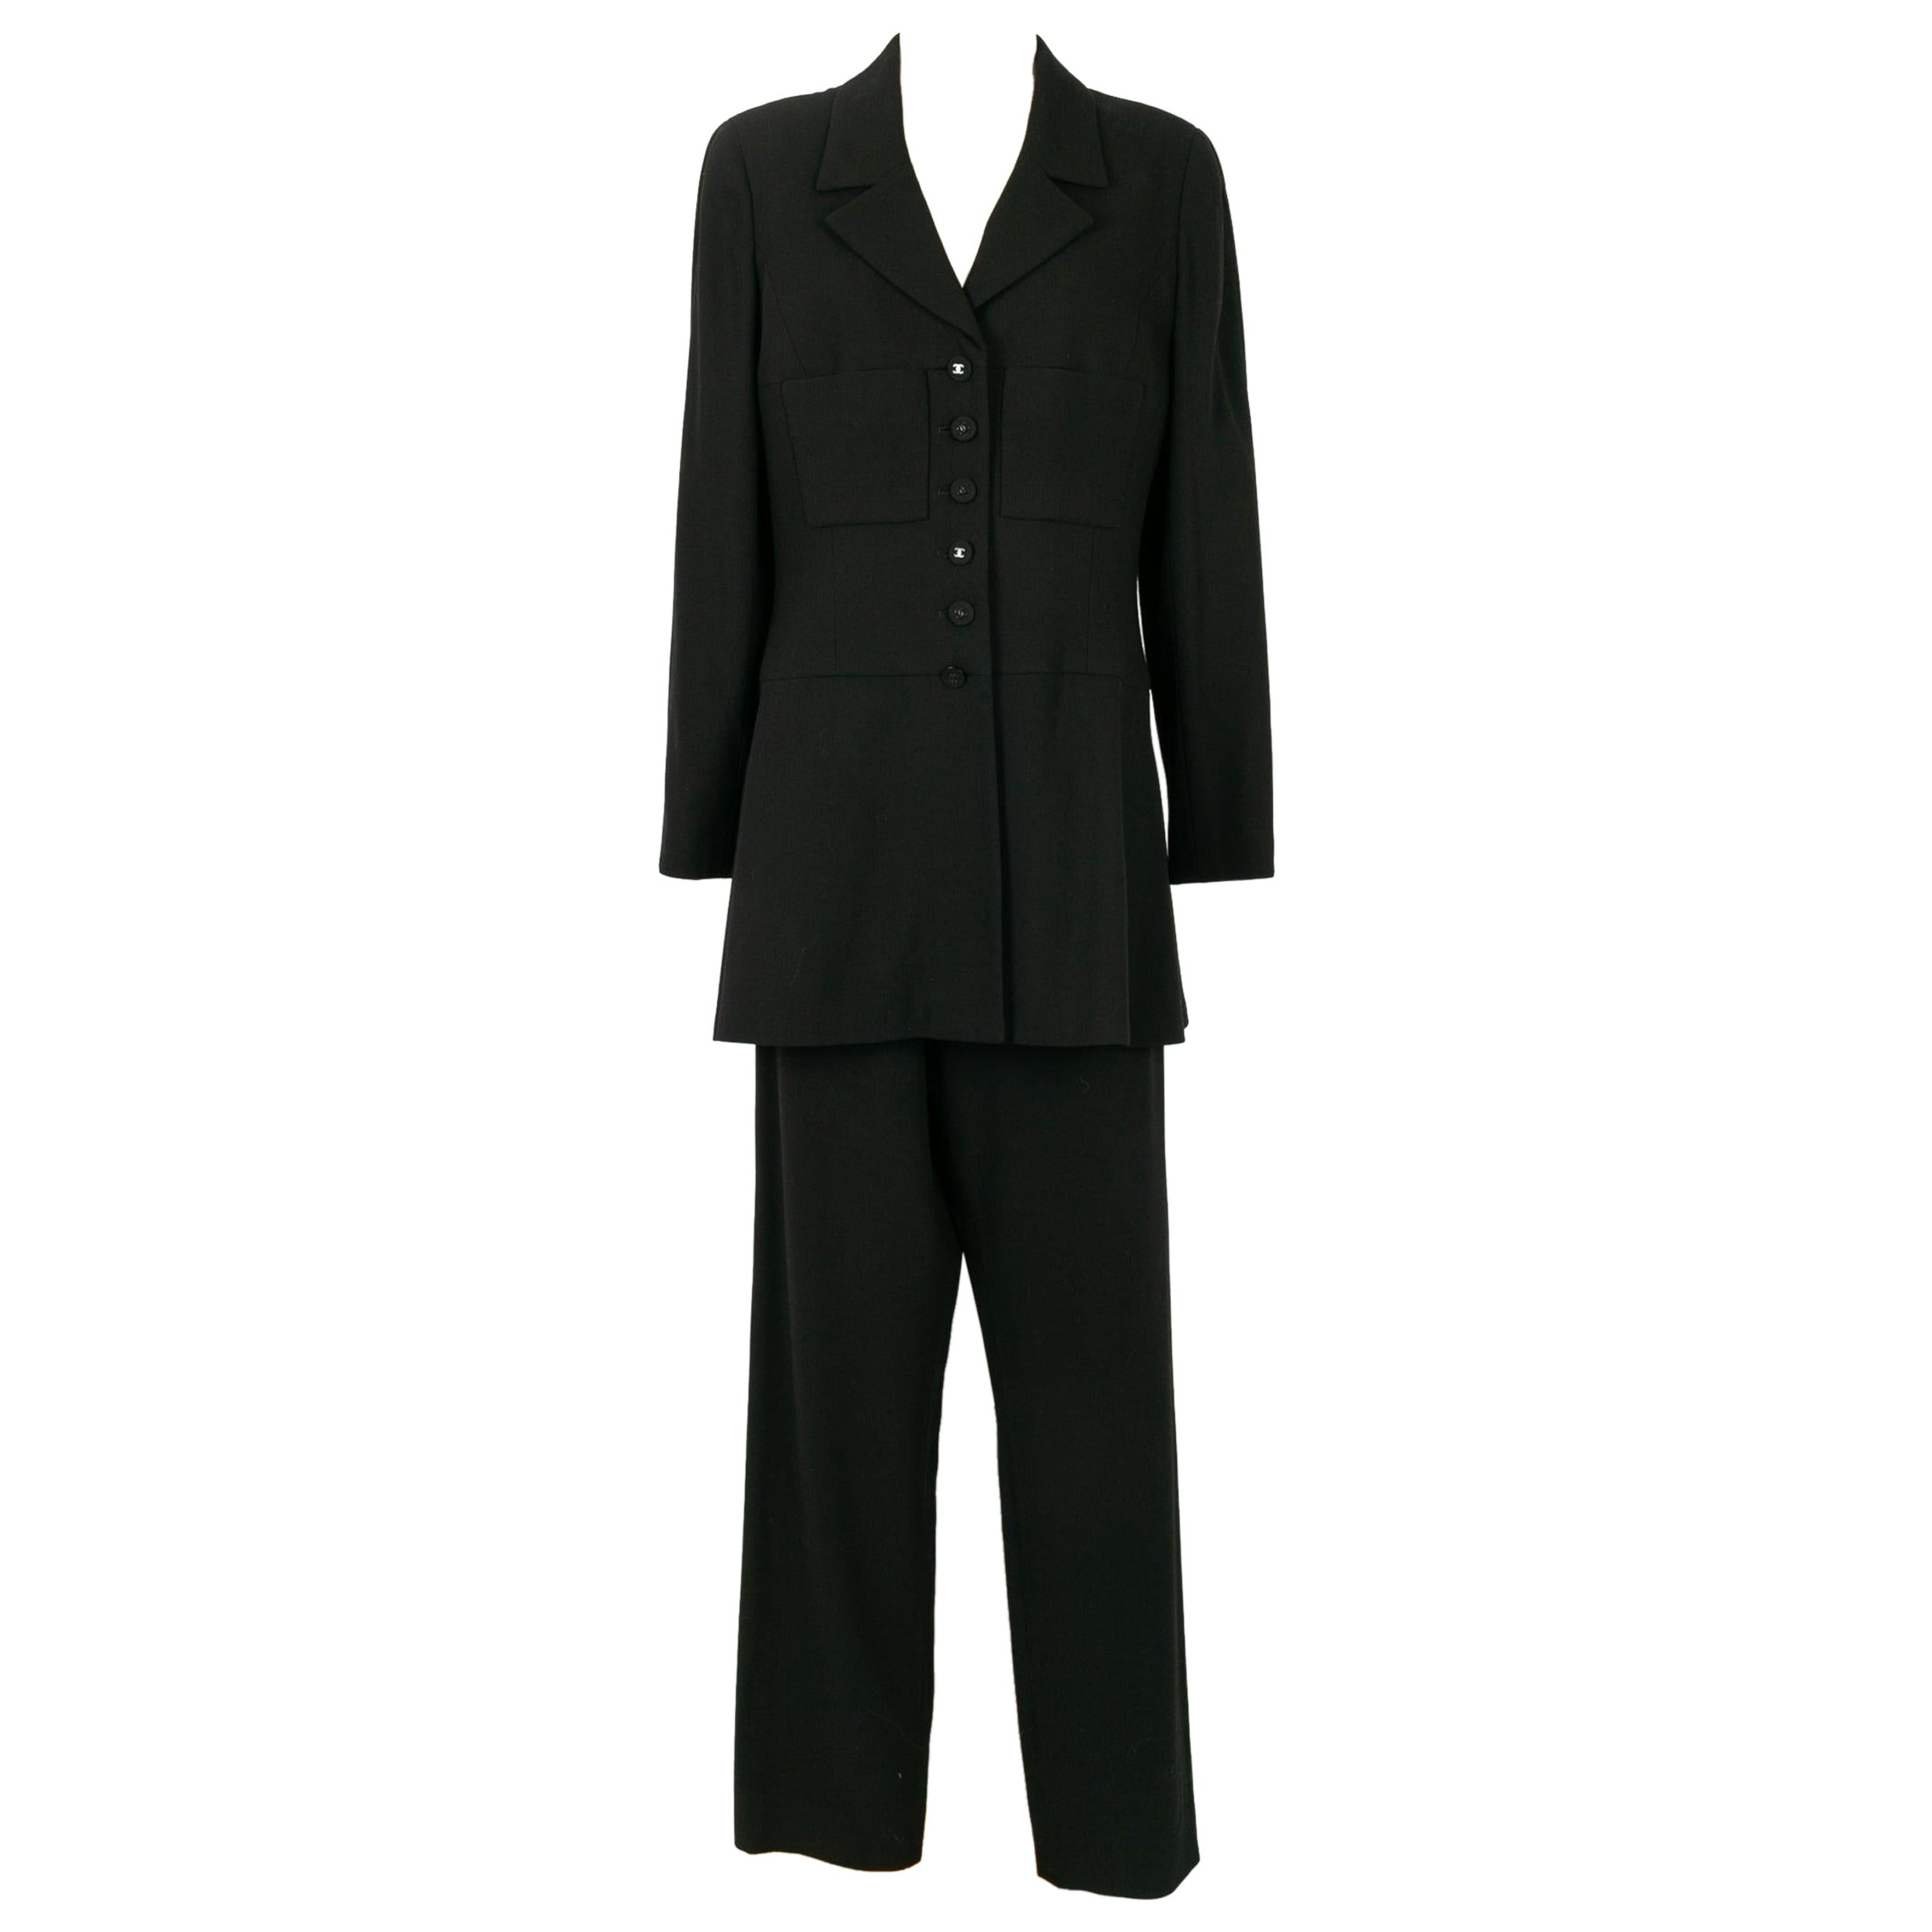 Chanel Suit Set of Jacket and Pants in Black Wool, 1997